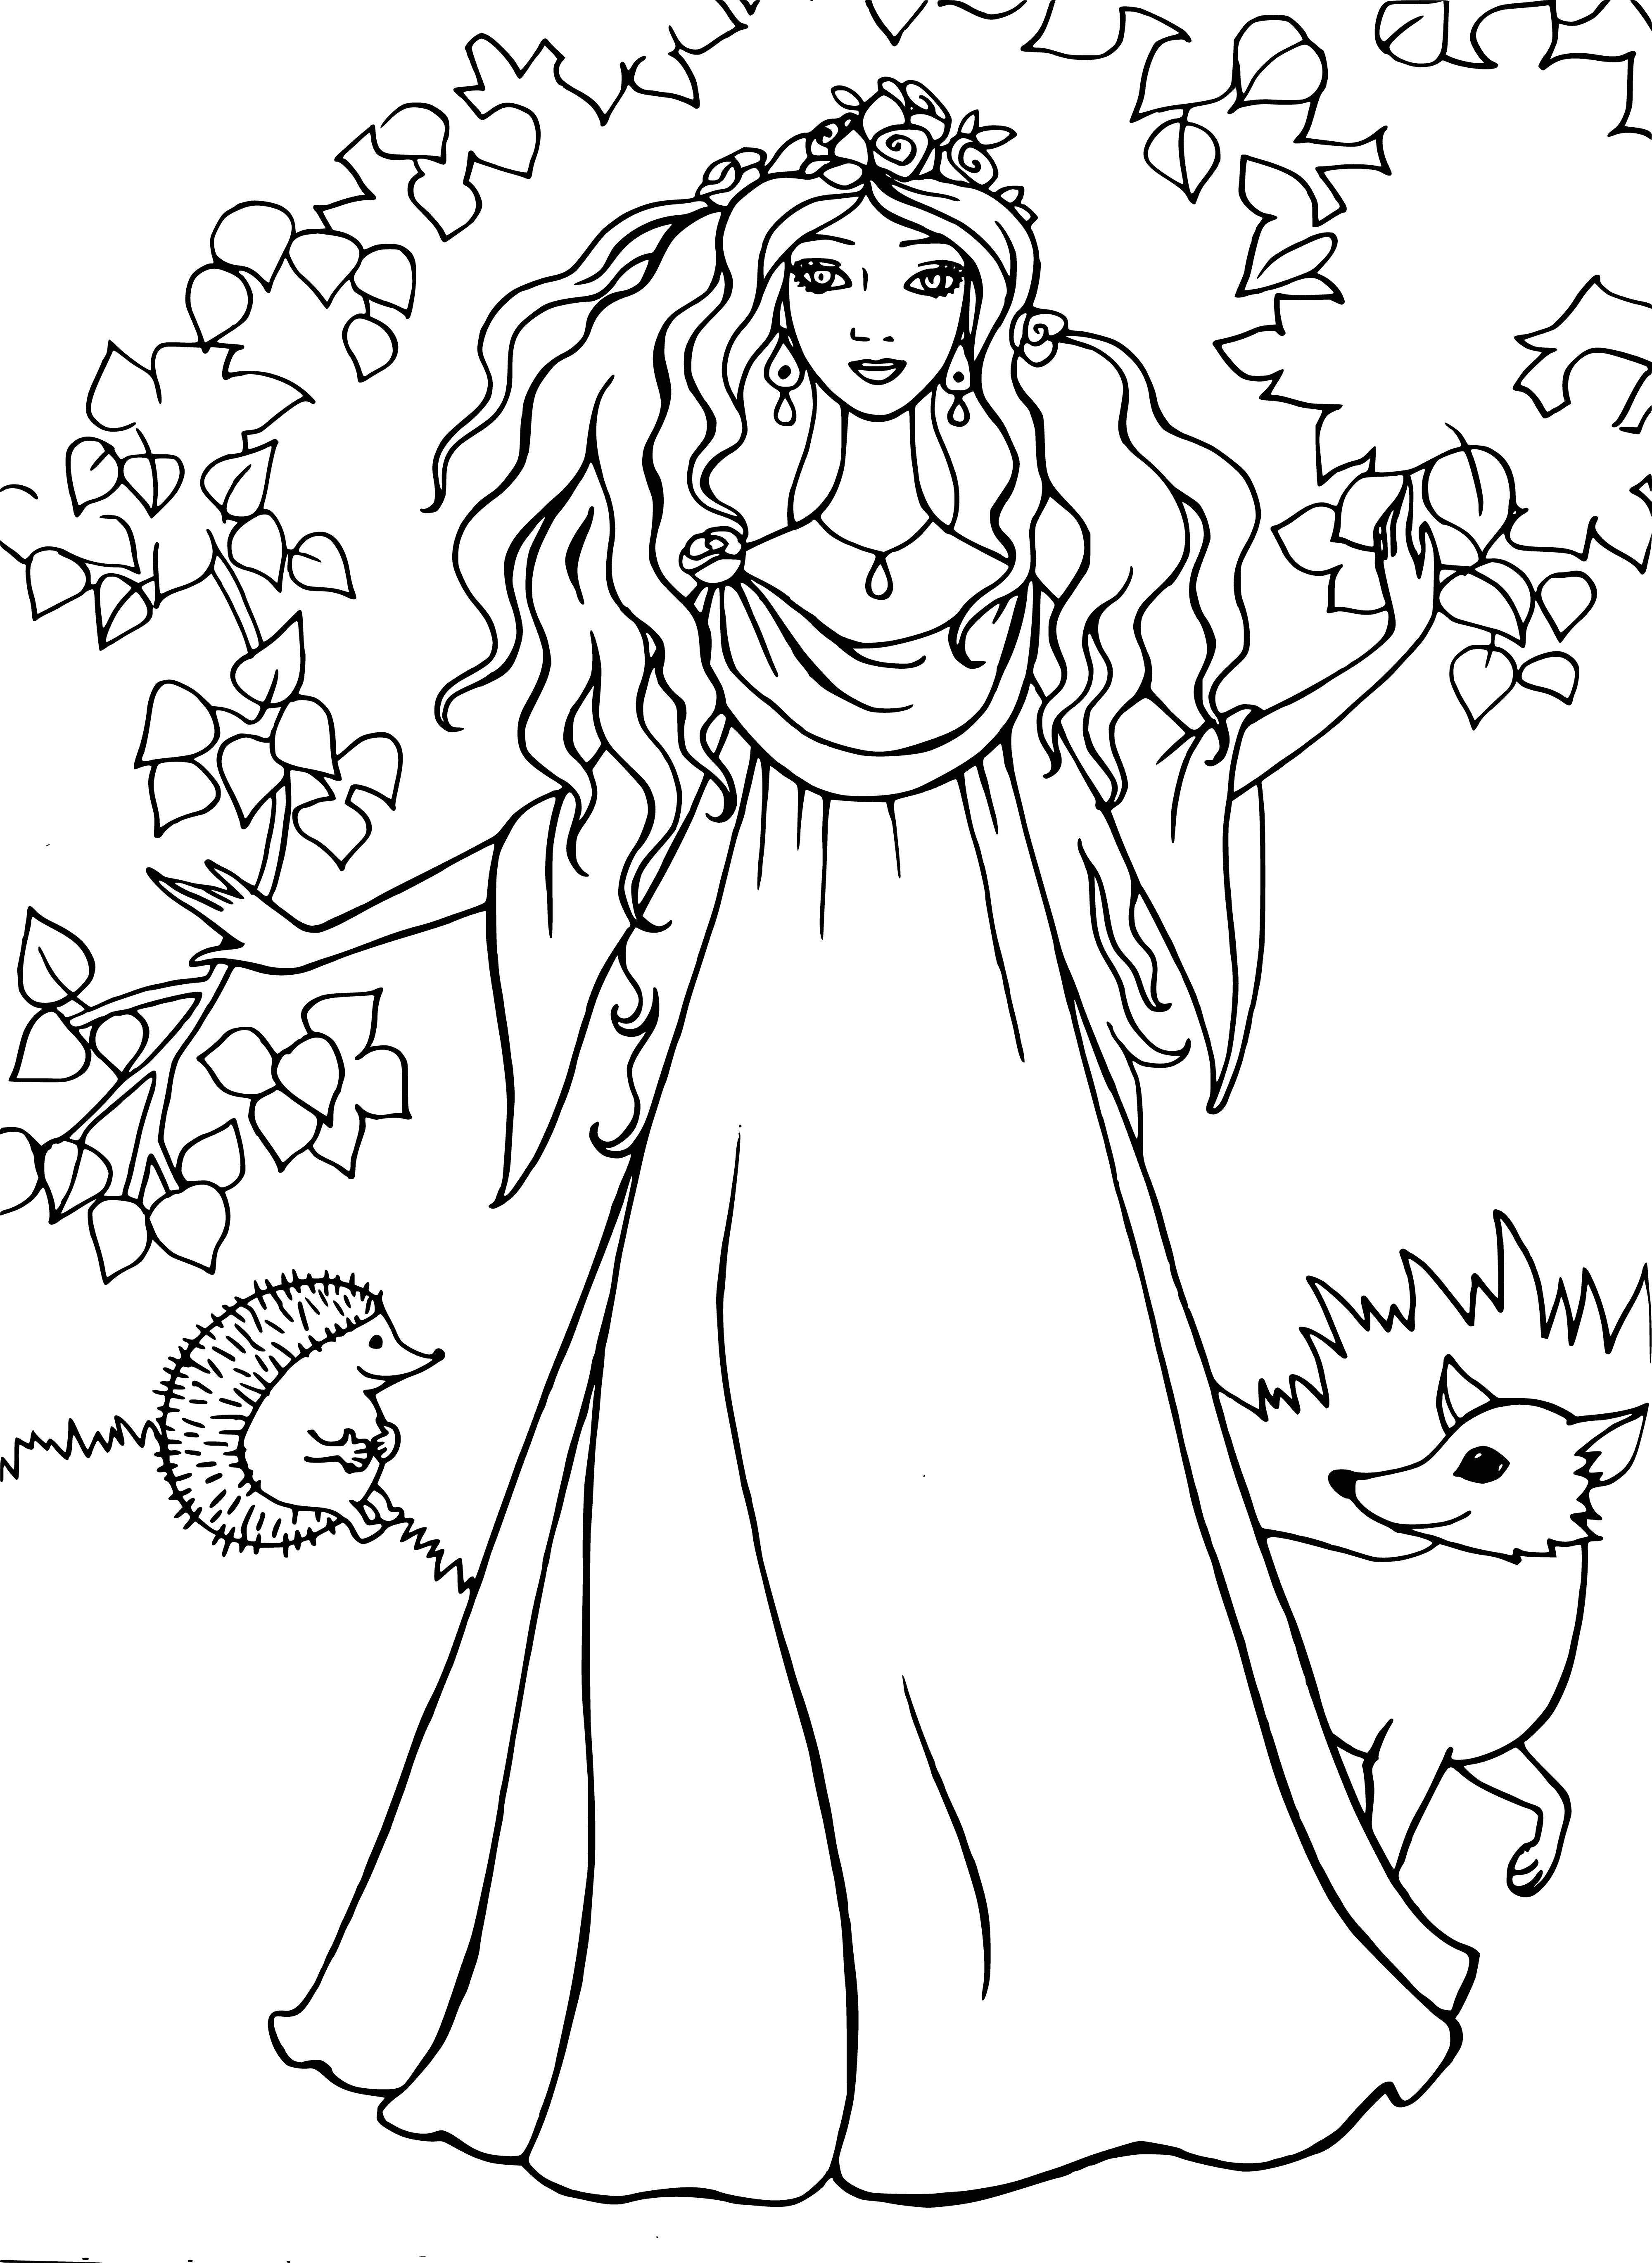 coloring page: Princess rules beautiful kingdom of young femailes in dresses & wings, living in castle of flowers. Relaxation time is spent at pond.